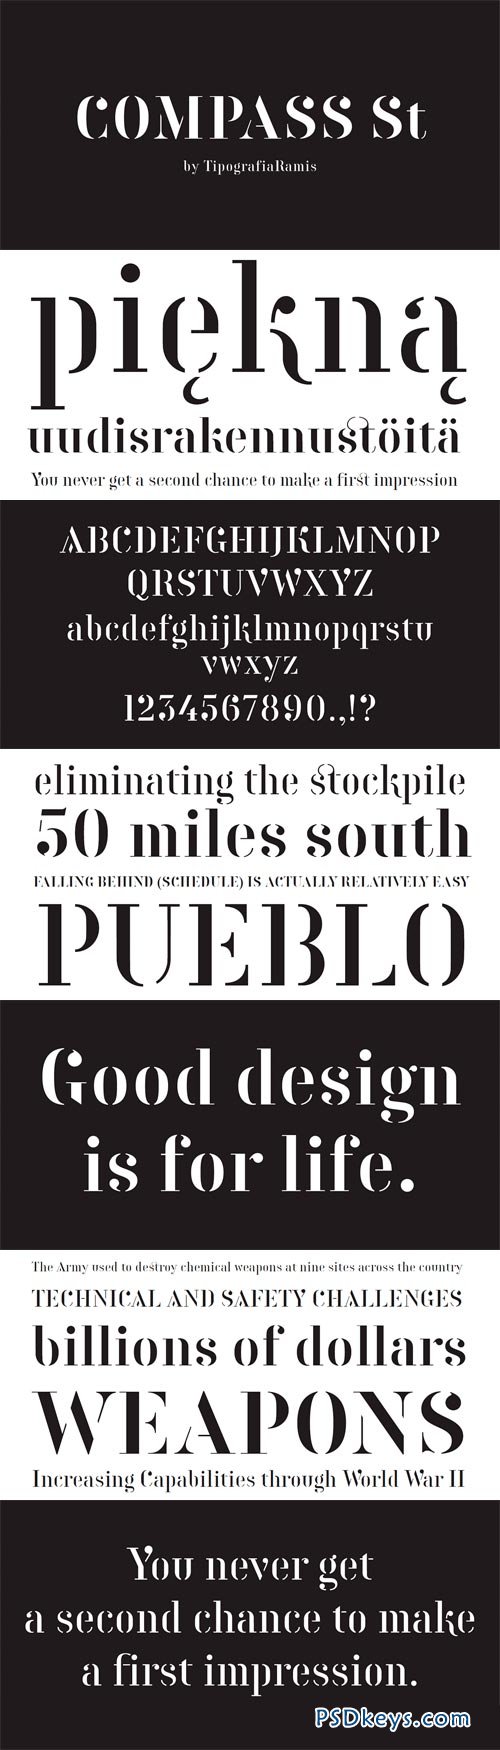 Compass St Font Family - 2 Fonts for $67